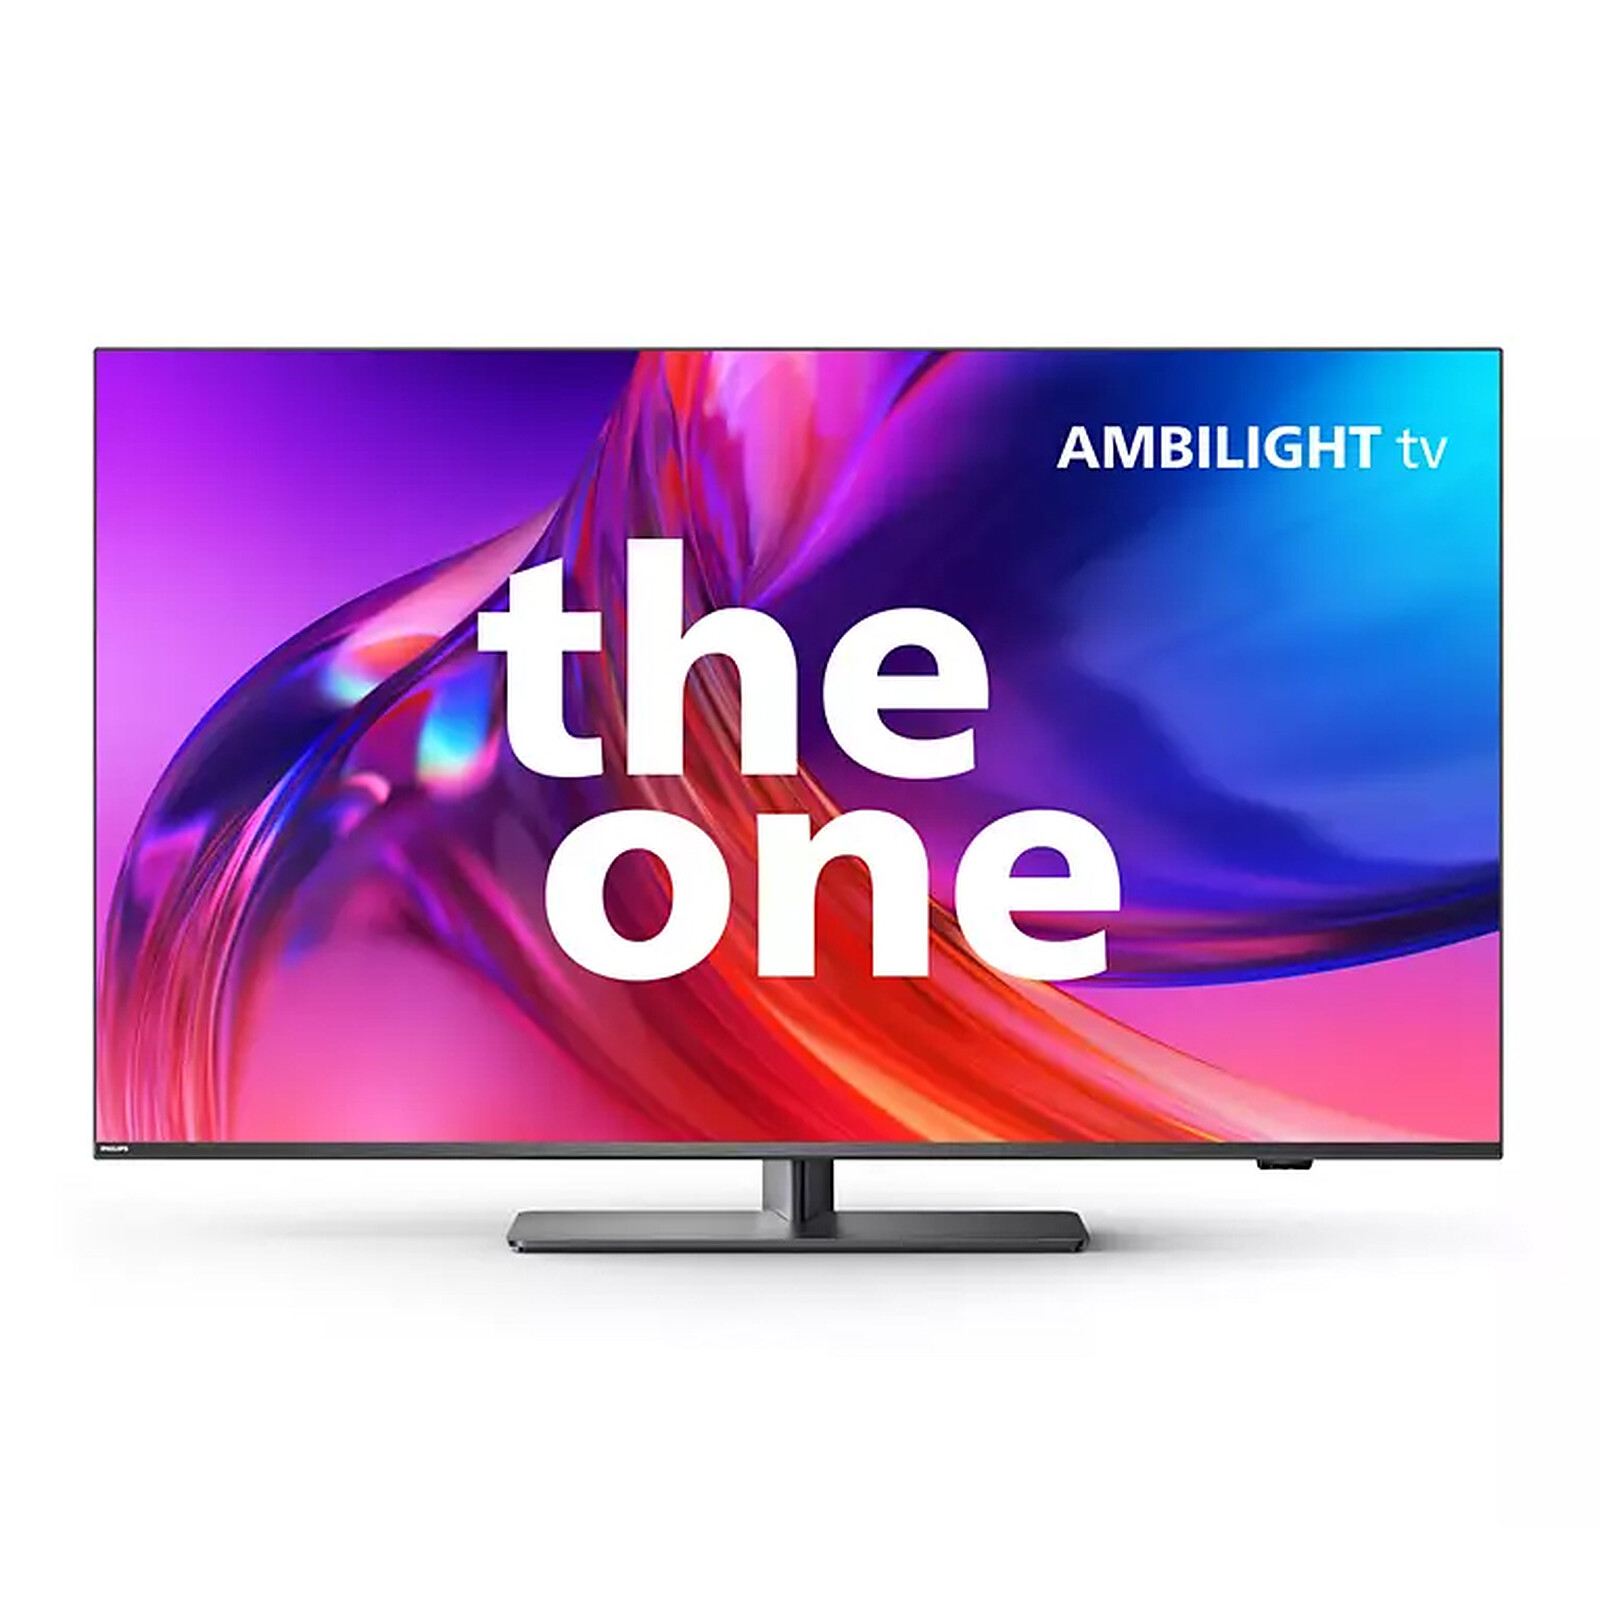 Philips The One - LDLC TV - 3-year 50PUS8808/12 warranty